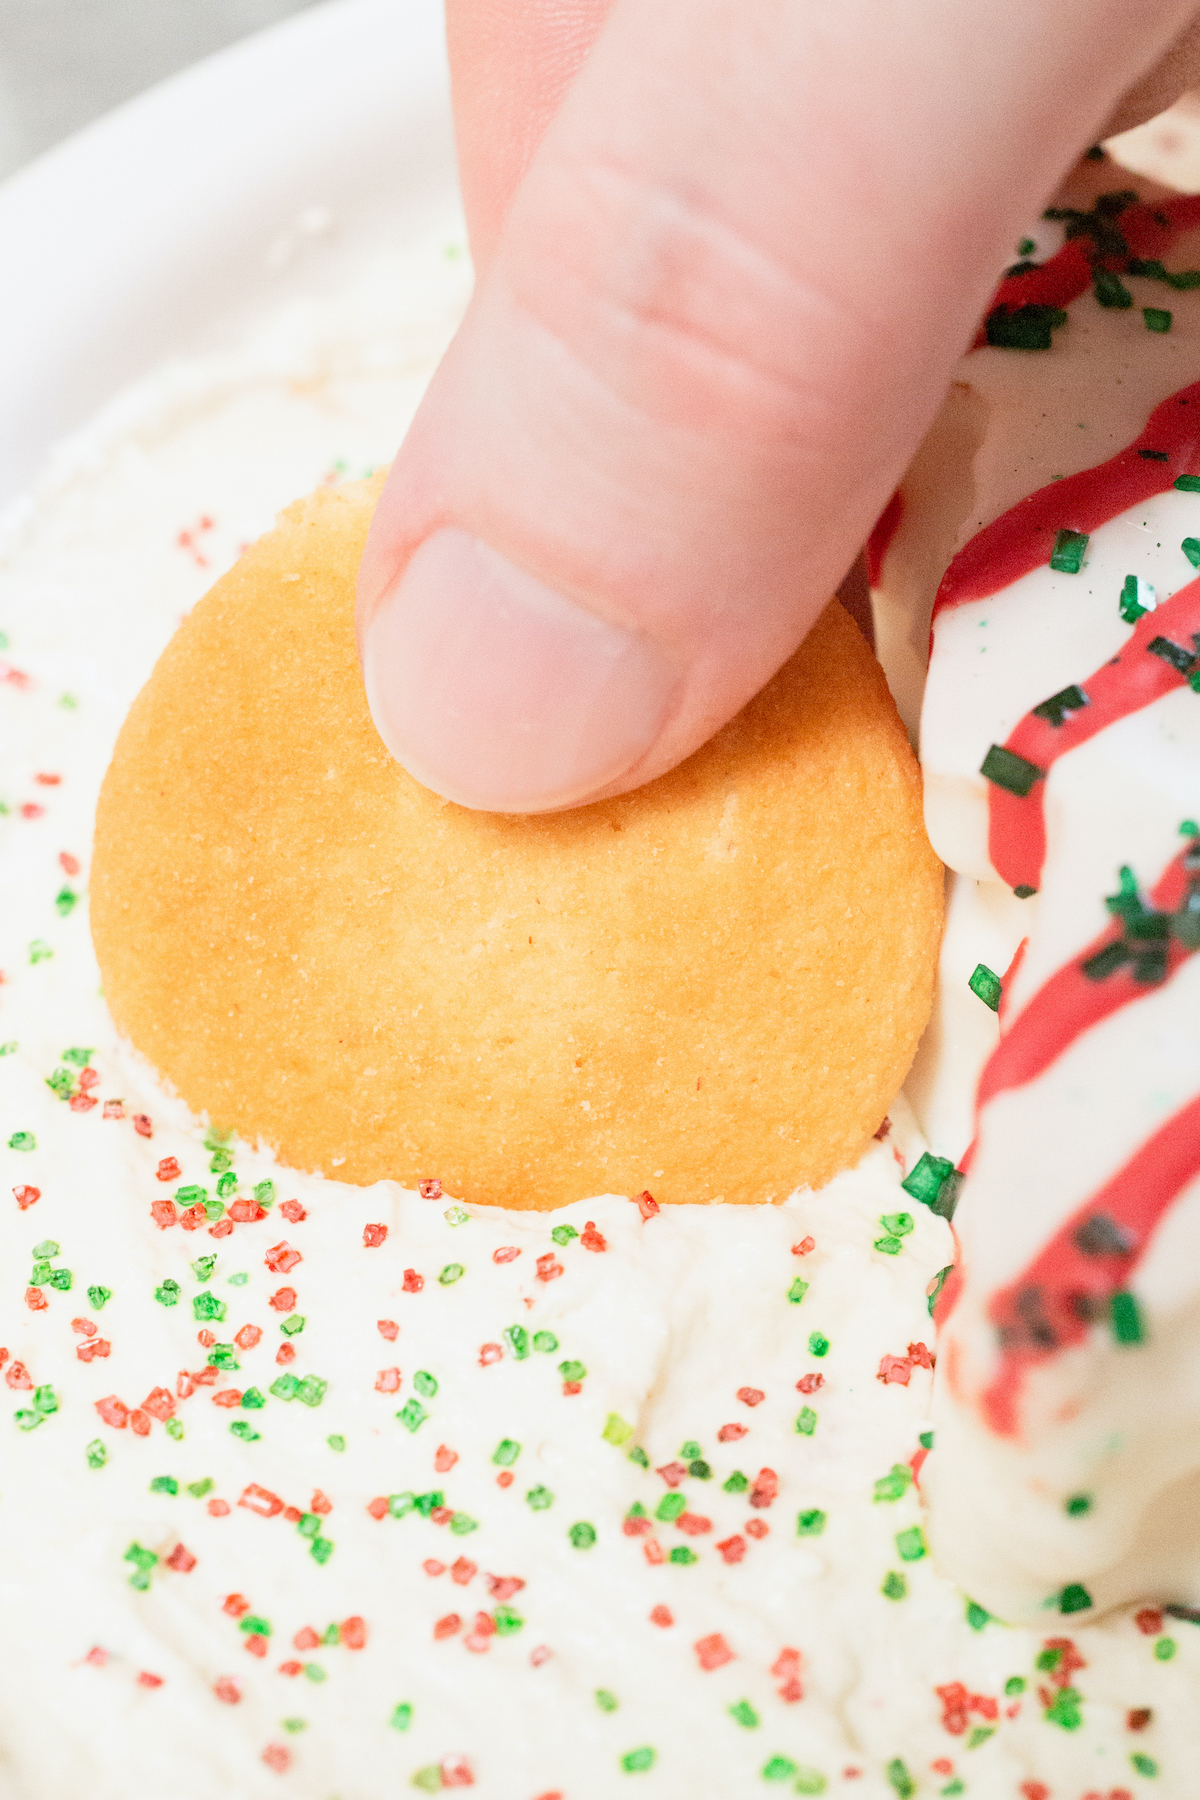 Close up of a finger dipping a Nilla wafer into Little Debbie's Christmas Tree Cake Dip.